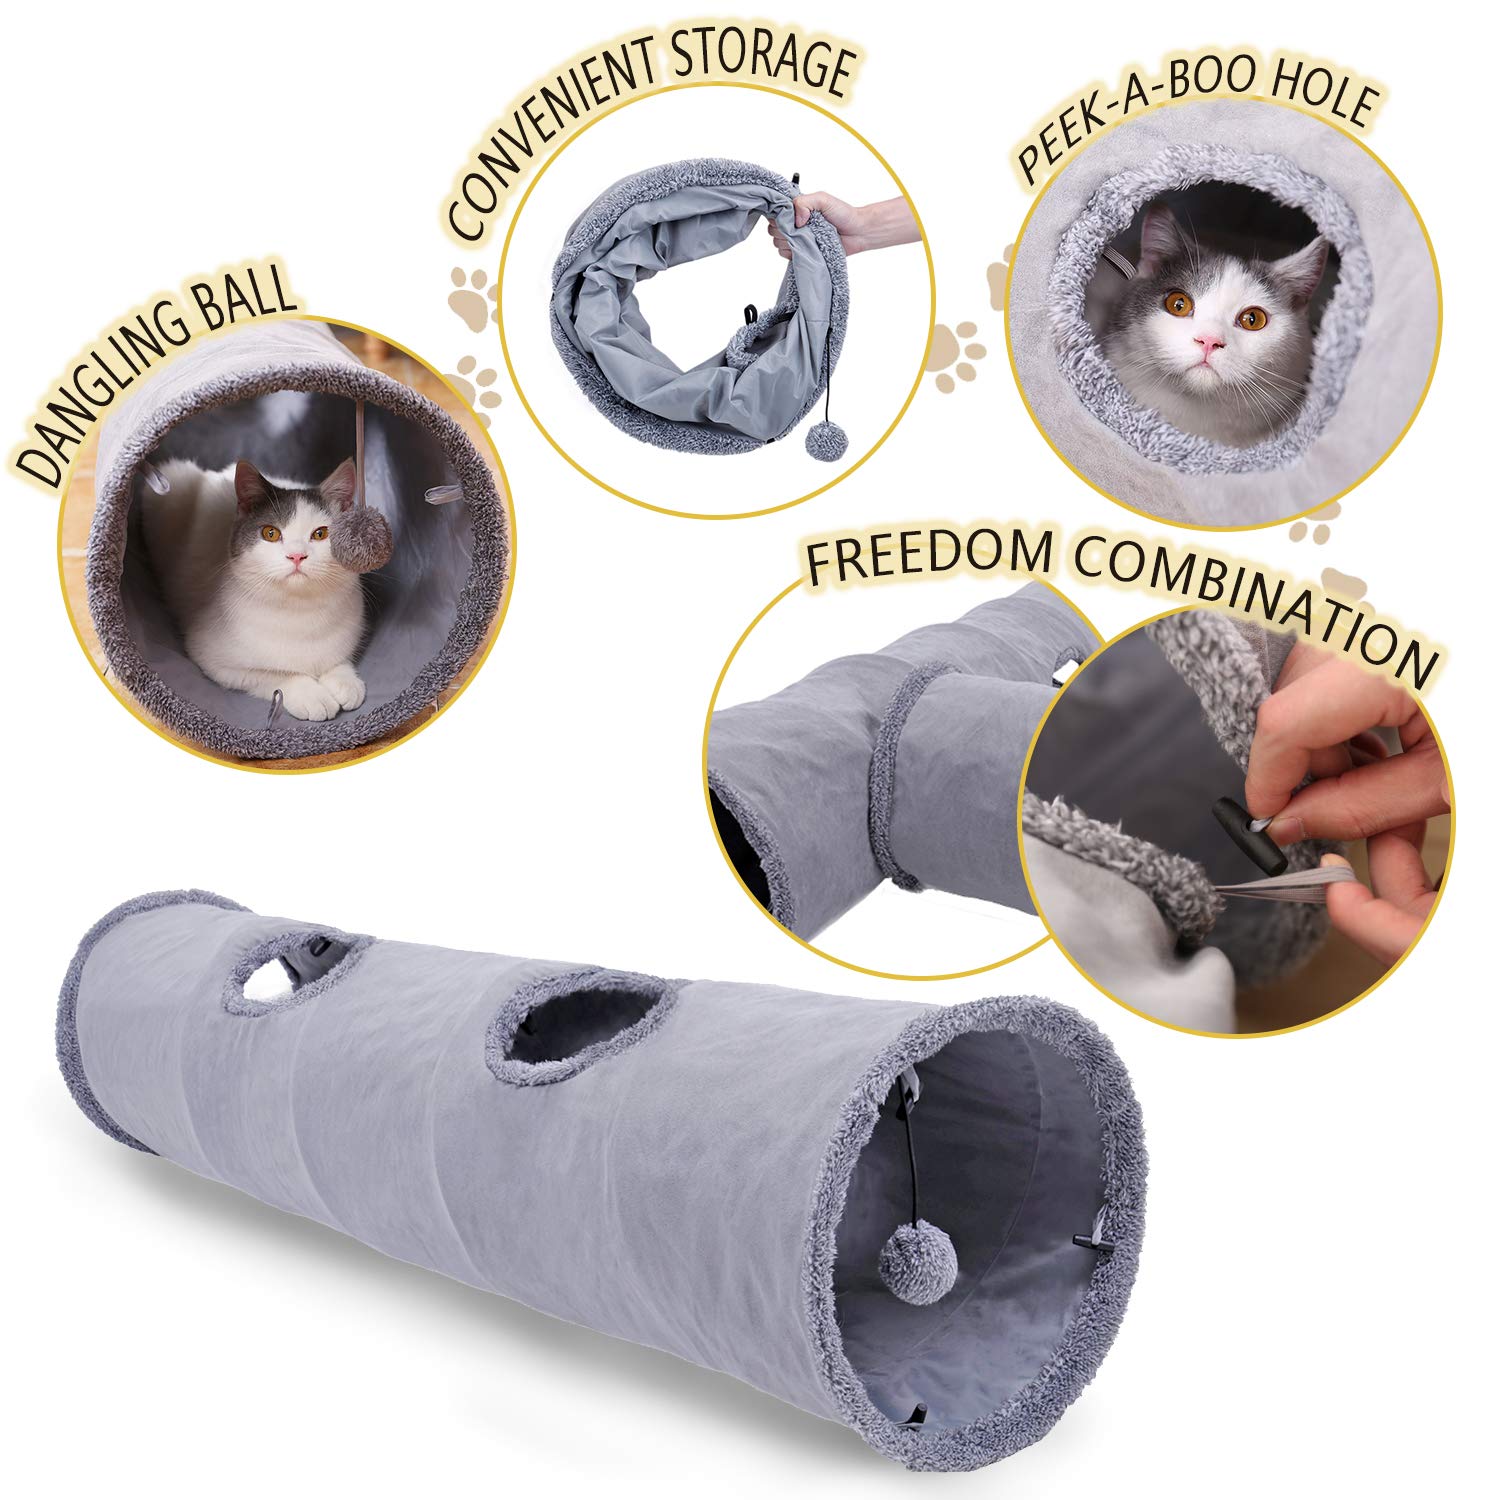 3 Way Cat Tunnel Toy for cats, Cat Play Tunnel for indoor cats kittens Cheap Pet Play High Quality Cat Tunnel Toys Manufactures